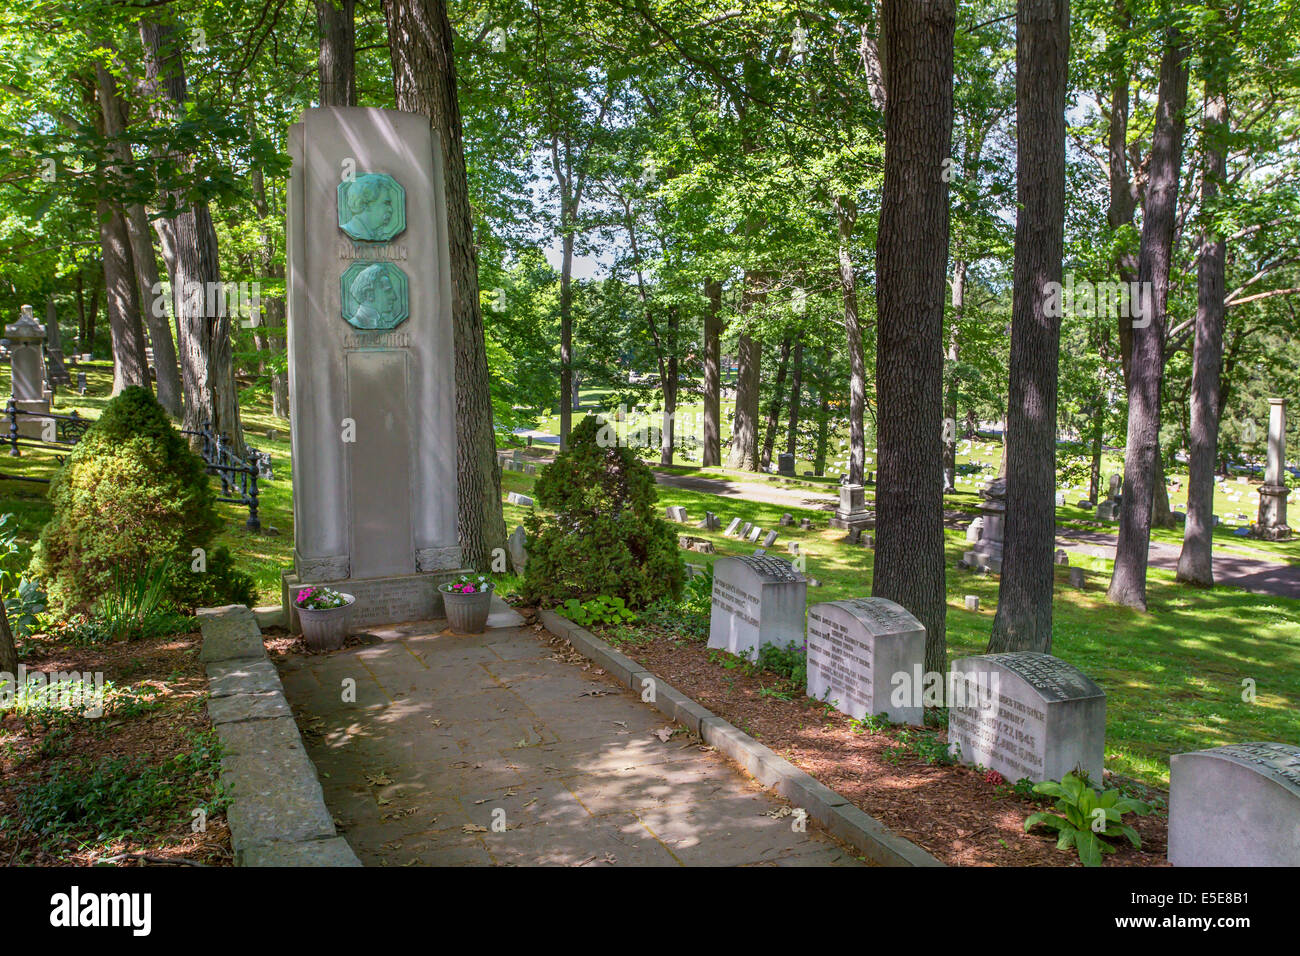 Samual Clements or Mark Twain's gravesite in Woodlawn Cemetery in Elmira New York Stock Photo